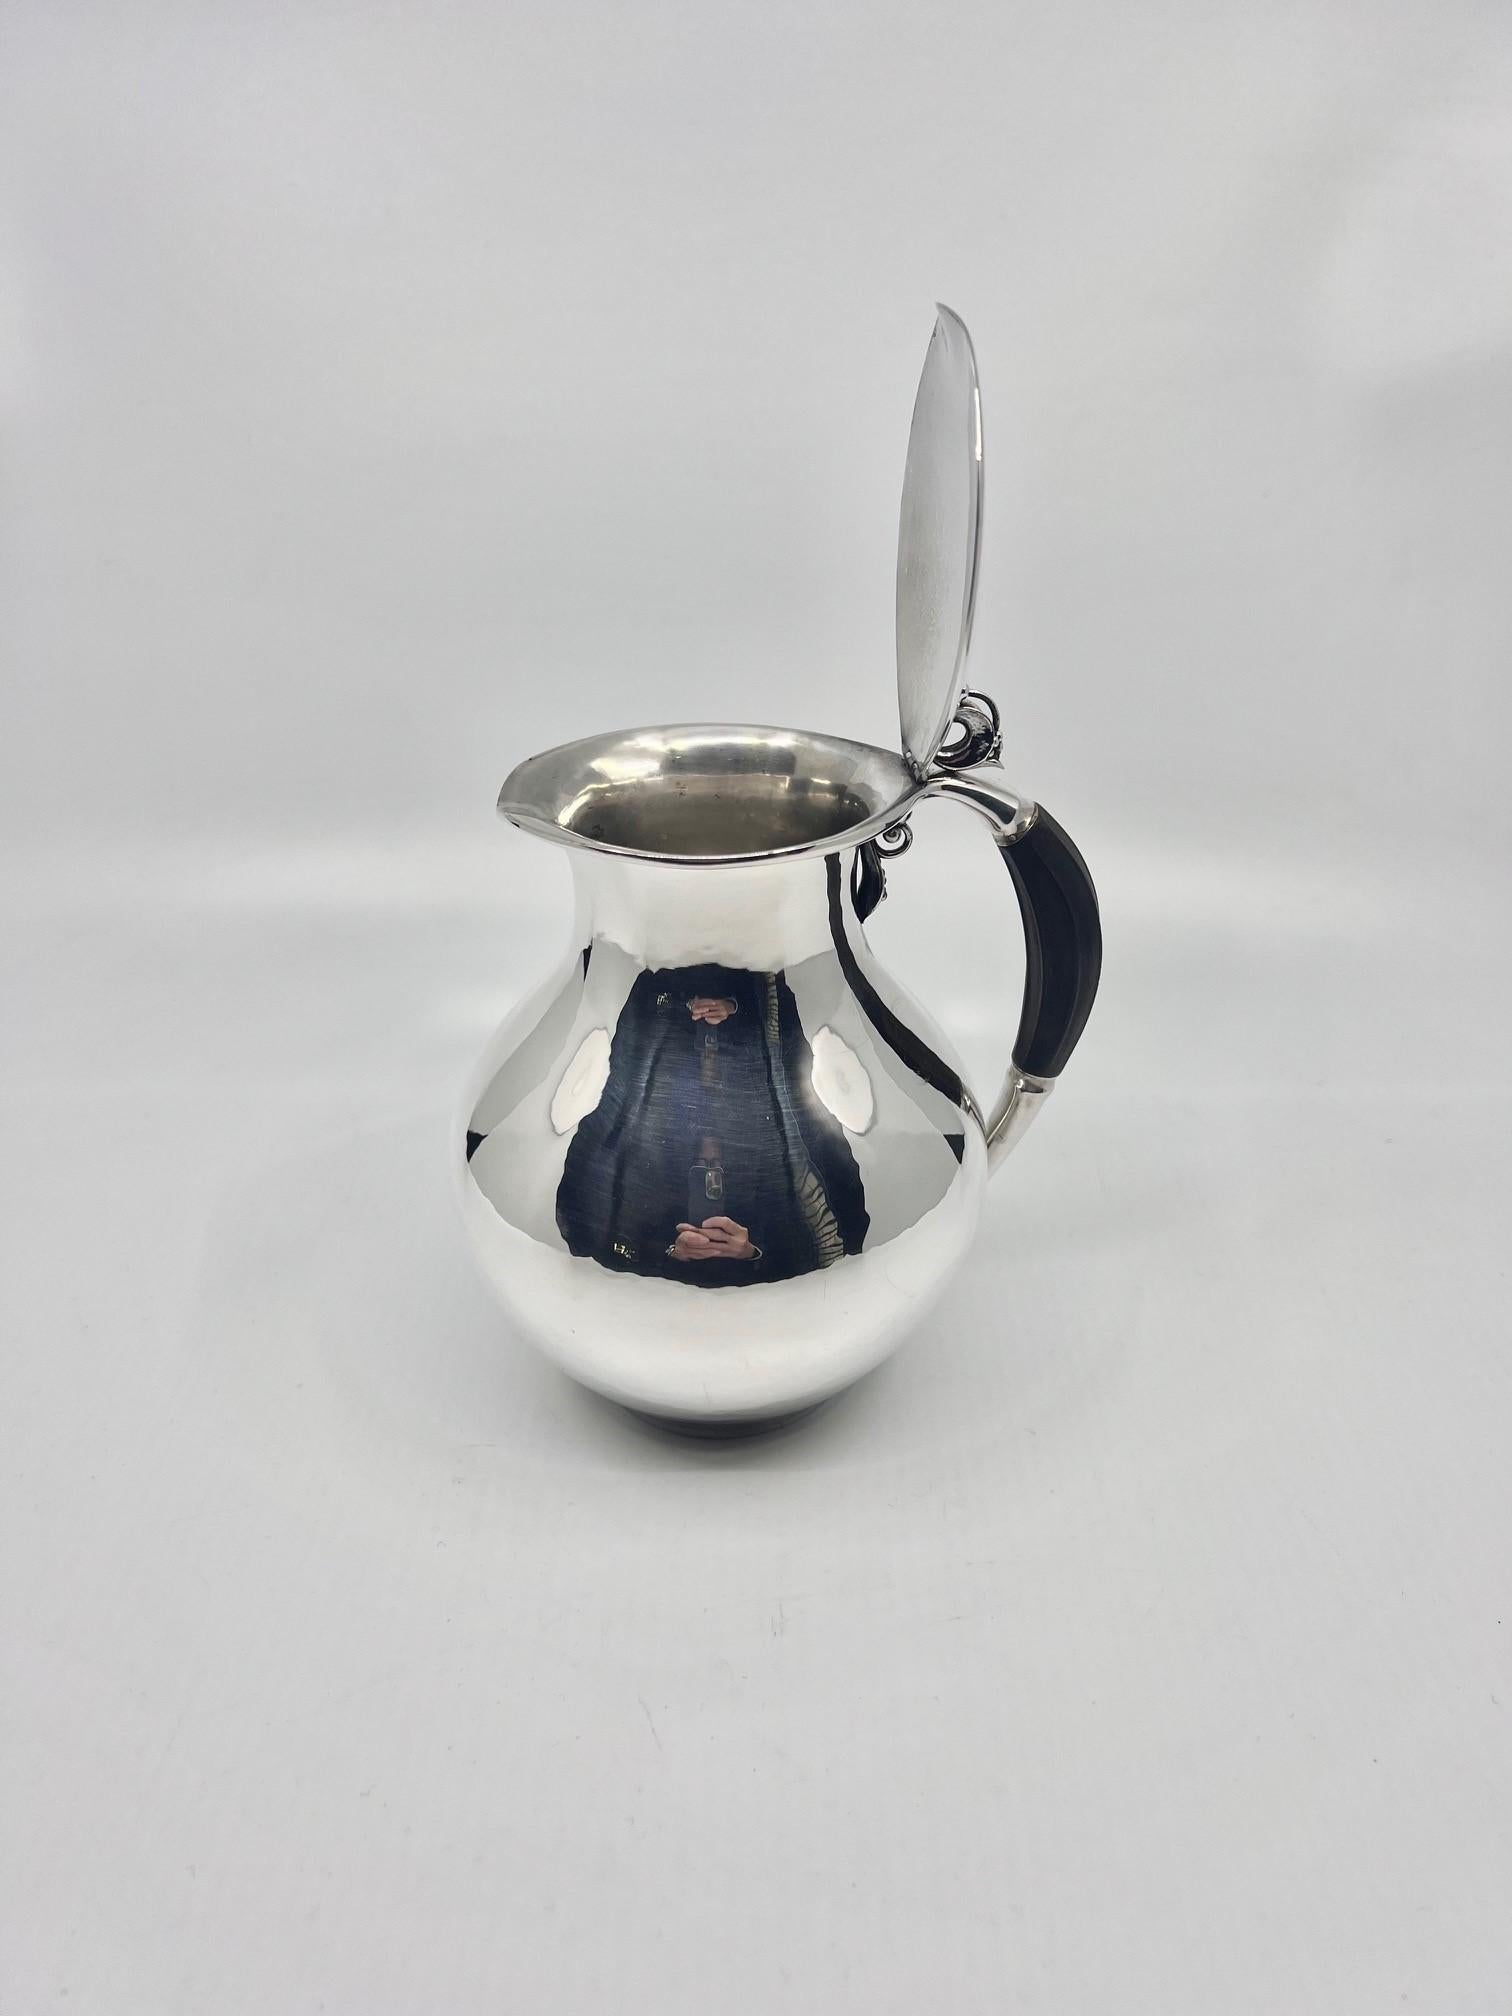 A sterling silver Georg Jensen pitcher with hinged lid and ebony handle, design #385C by Jorgen Jensen, one of Georg Jensen’s sons. Jorgen Jensen designed for Jensen from 1936-1962, he is best known for his Art Deco designs. This pitcher is one of